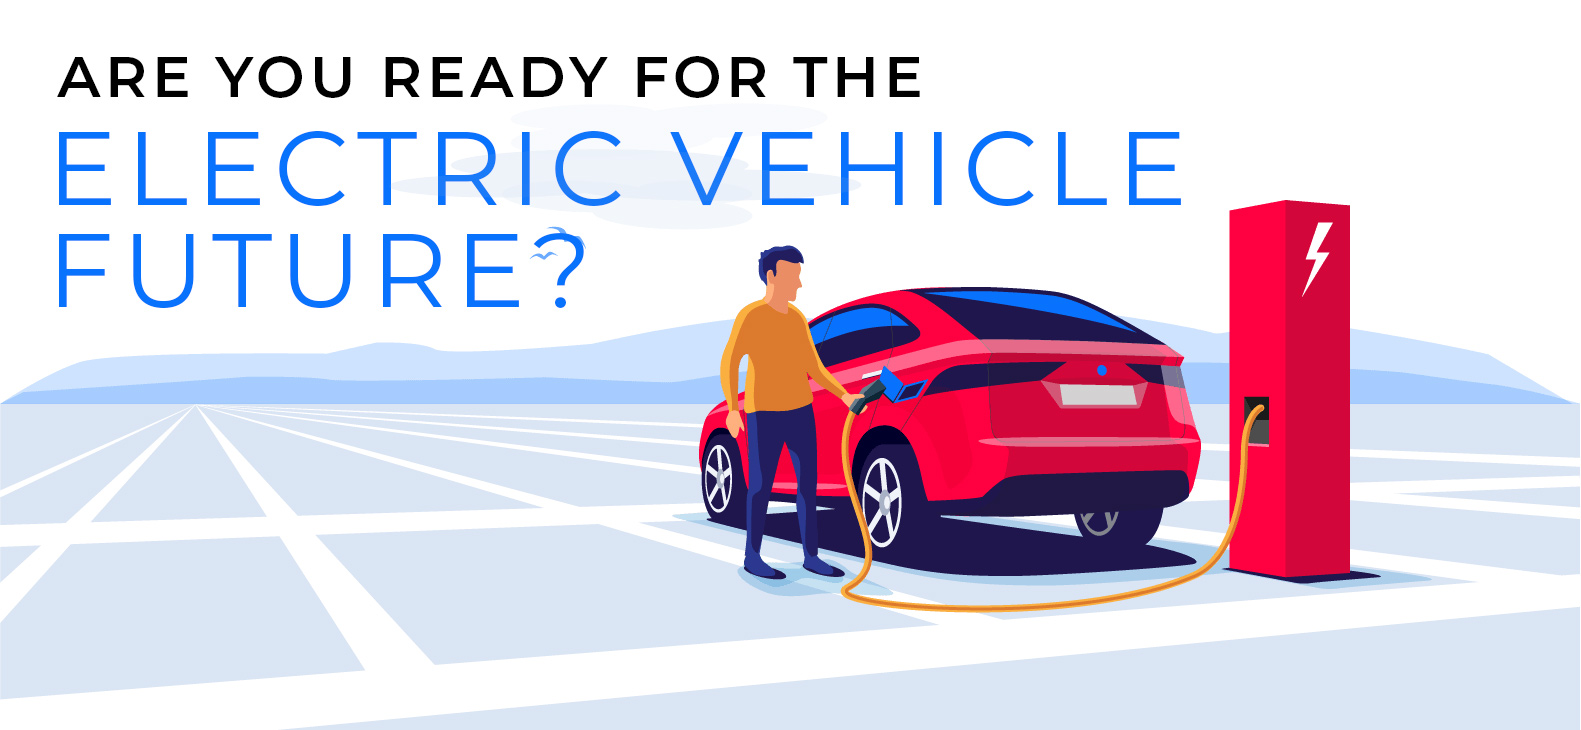 Are You Ready for the Electric Vehicle Future?